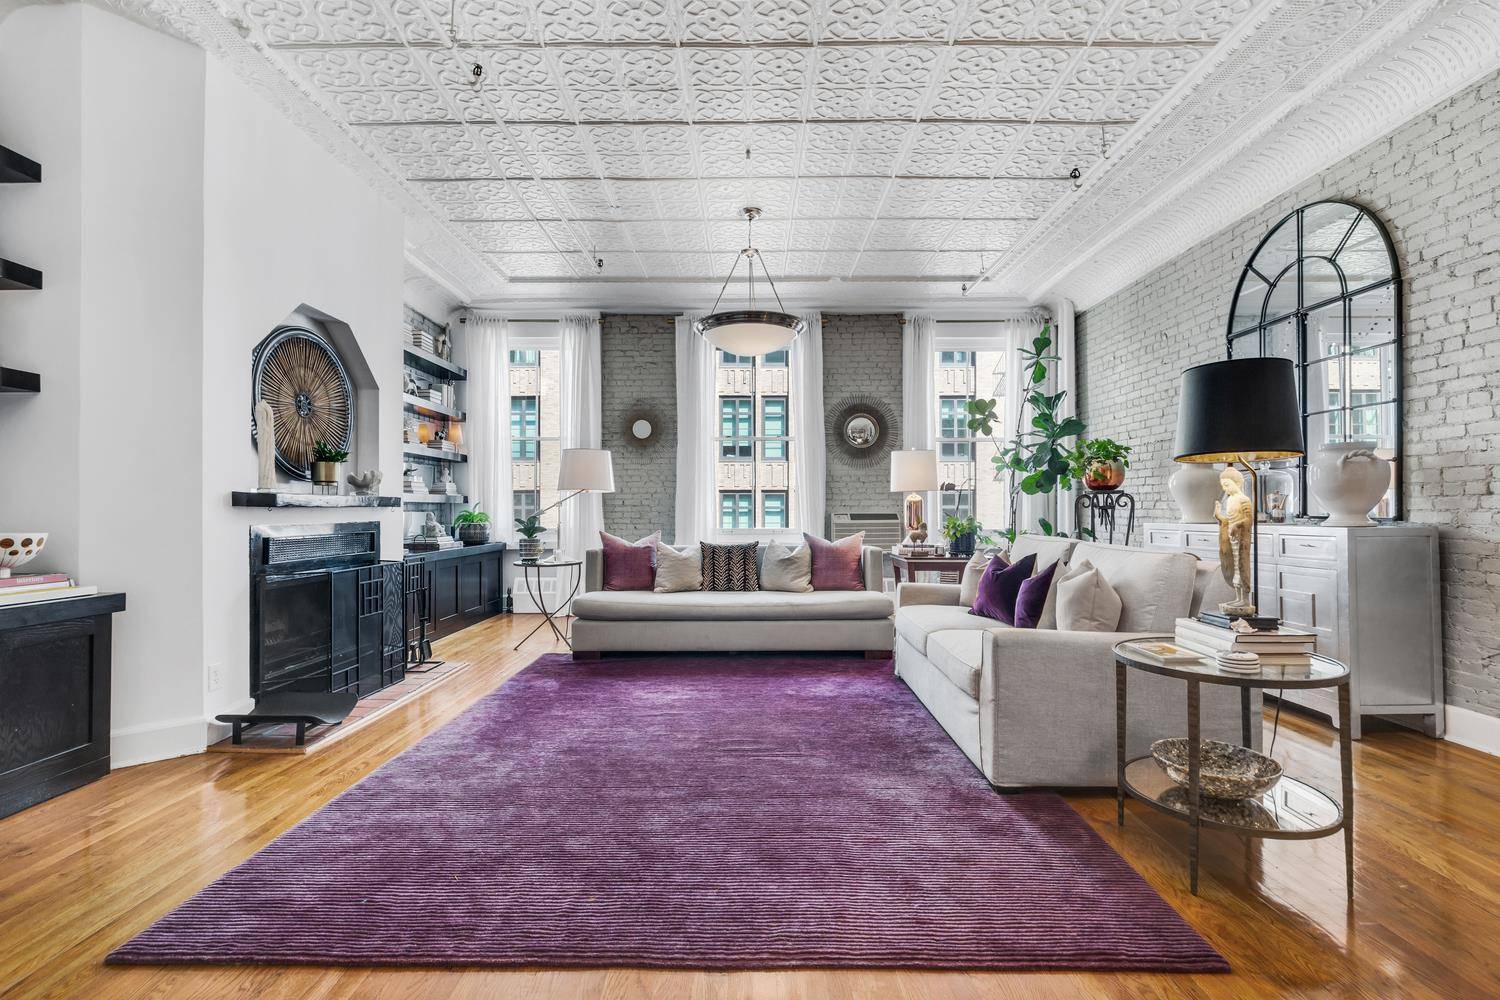 This beautifully designed, 1500 sf classic loft in the heart of TriBeCa will charm you with its almost 12 foot tin ceilings, exposed brick walls, hardwood floors and oversized windows.